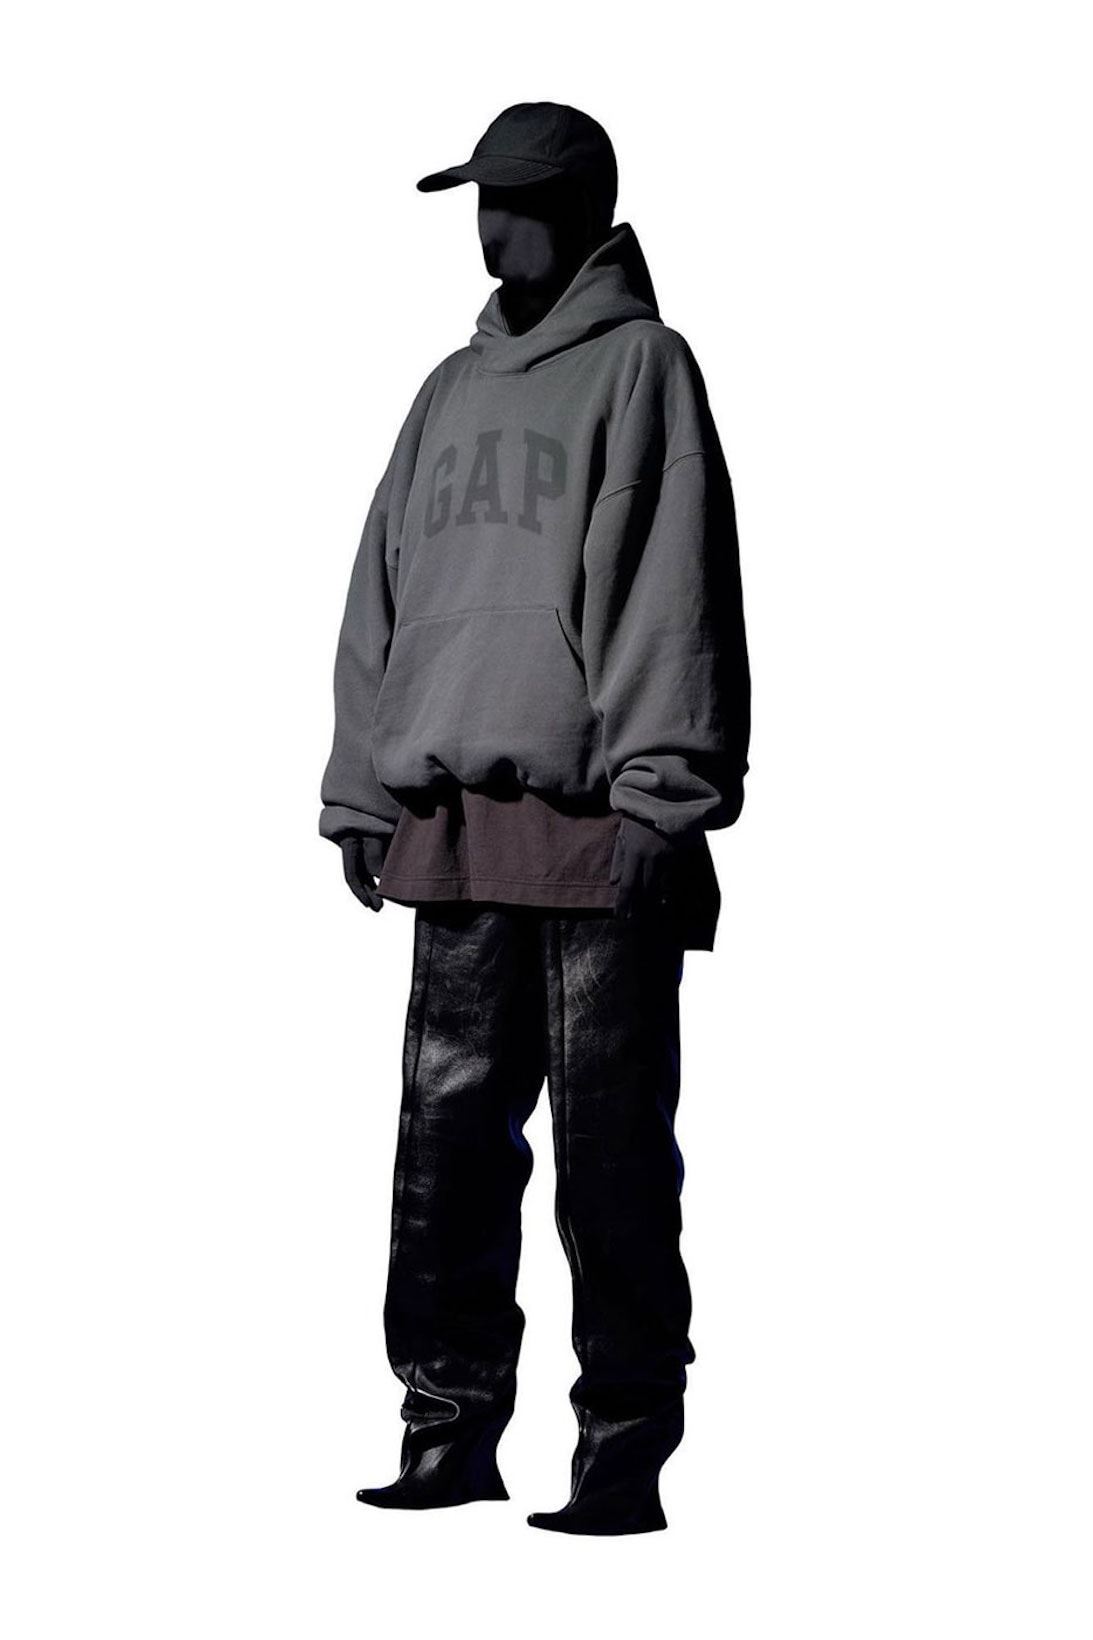 Balenciaga Yeezy Gap Engineered By Fitted Sweatpants in Black